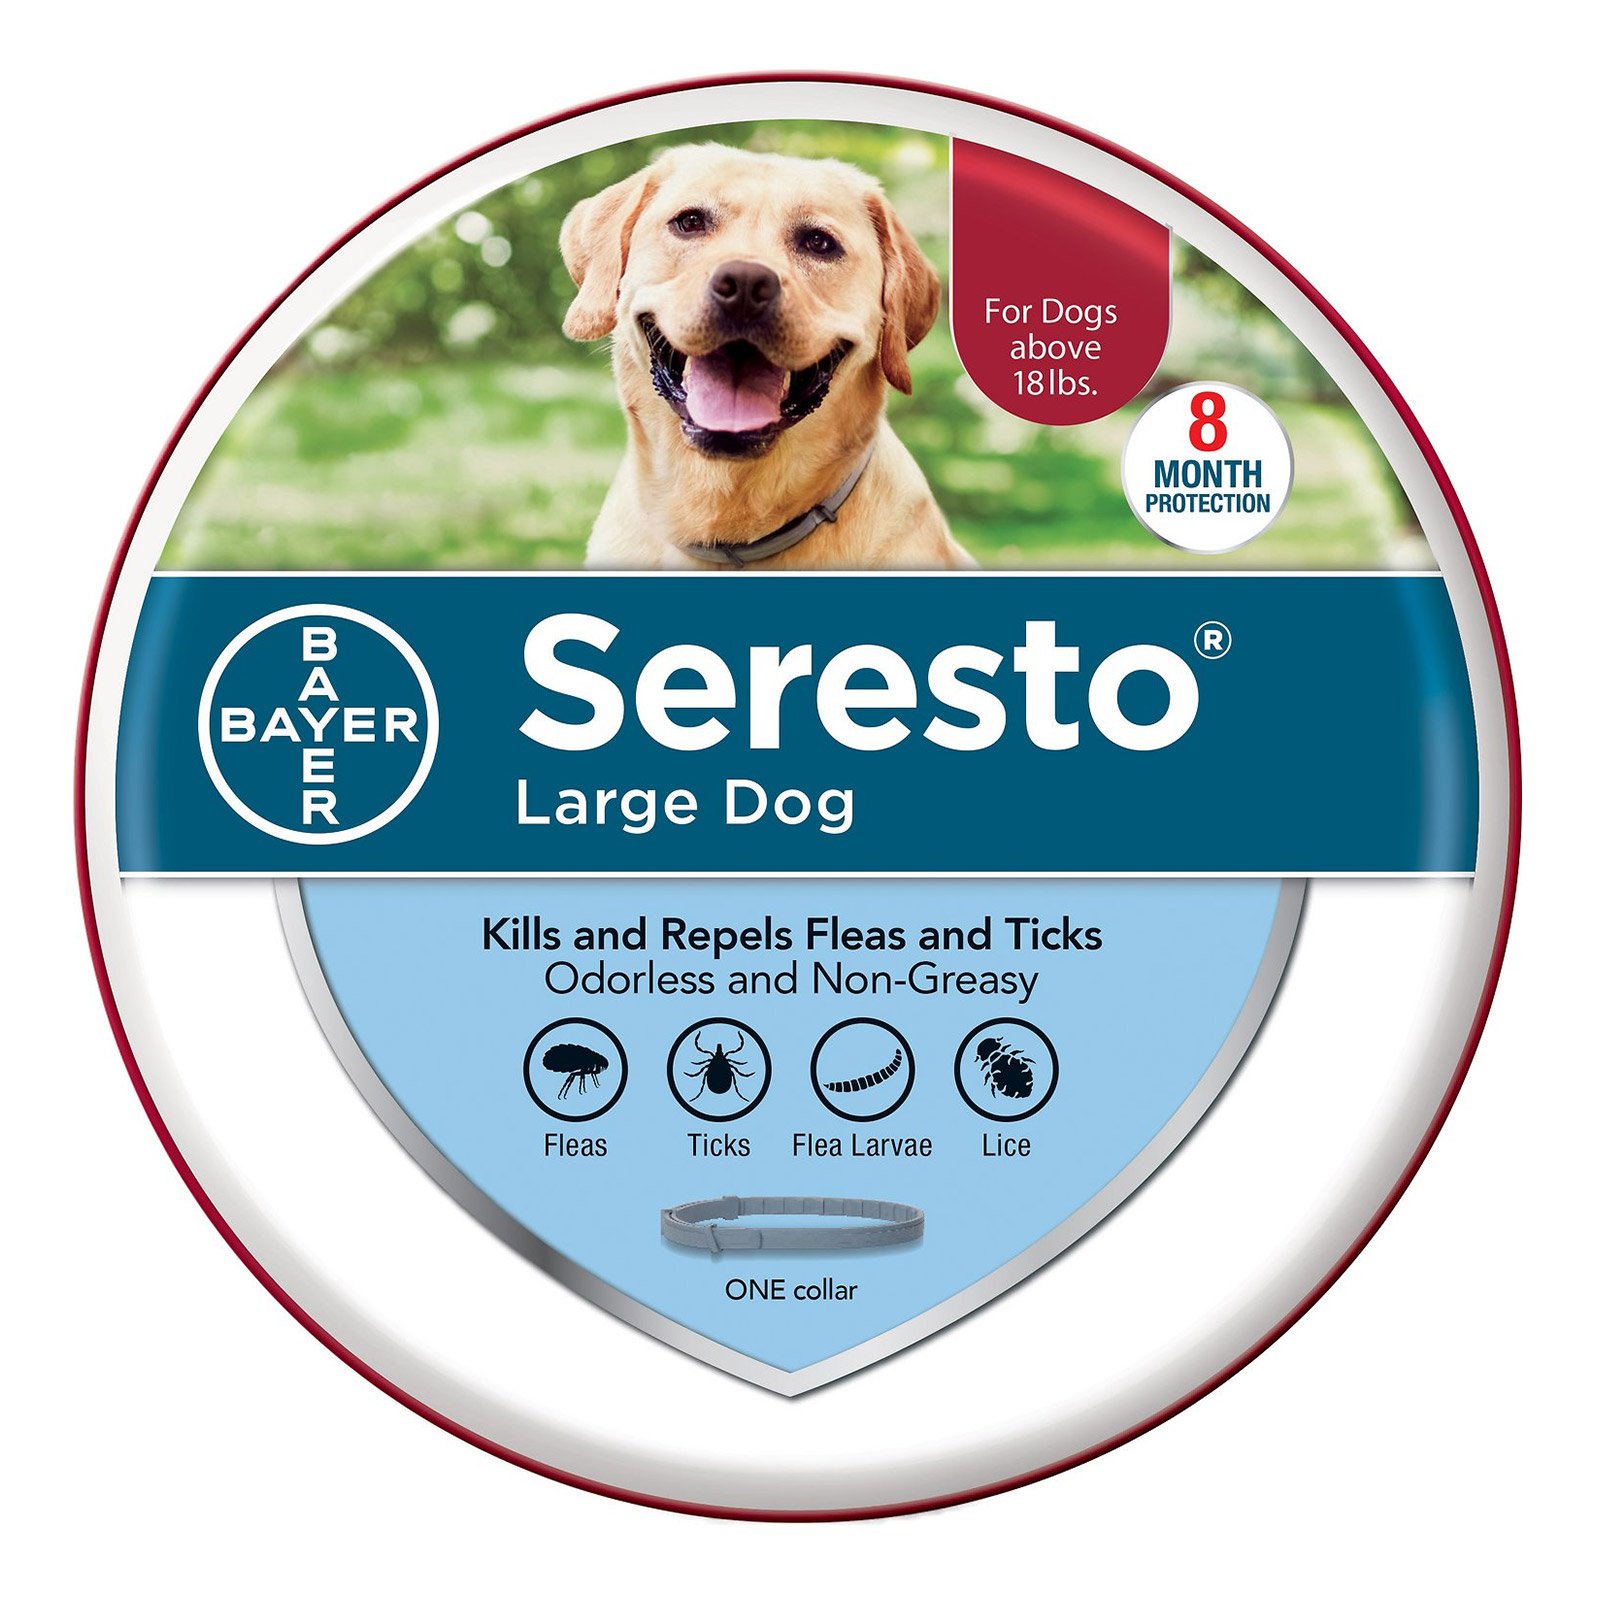 Seresto Dog Collar For Large Dogs over 18lbs - 27.5 inch (70 cm)